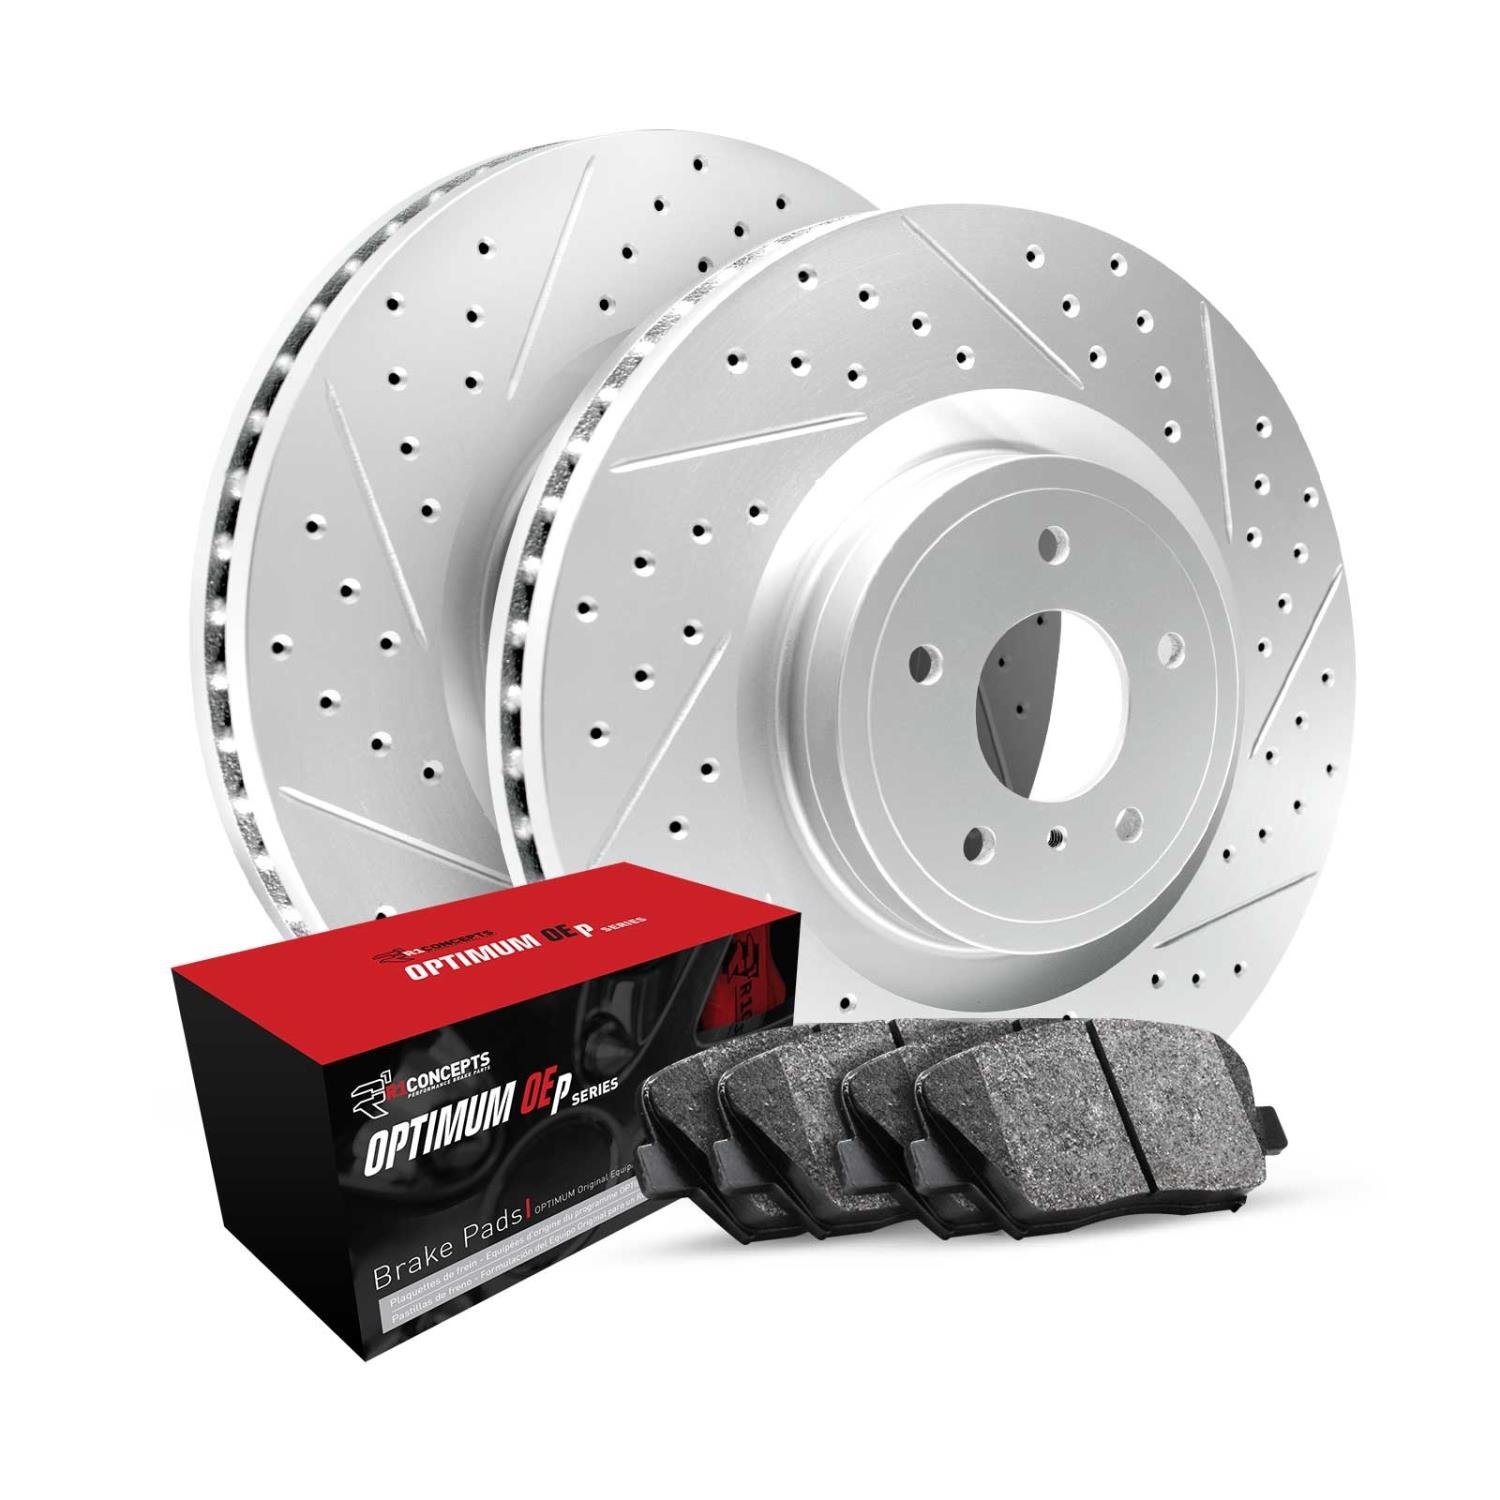 GEO-Carbon Drilled & Slotted Brake Rotor Set w/Optimum OE Pads, 2007-2010 Ford/Lincoln/Mercury/Mazda, Position: Front & Rear